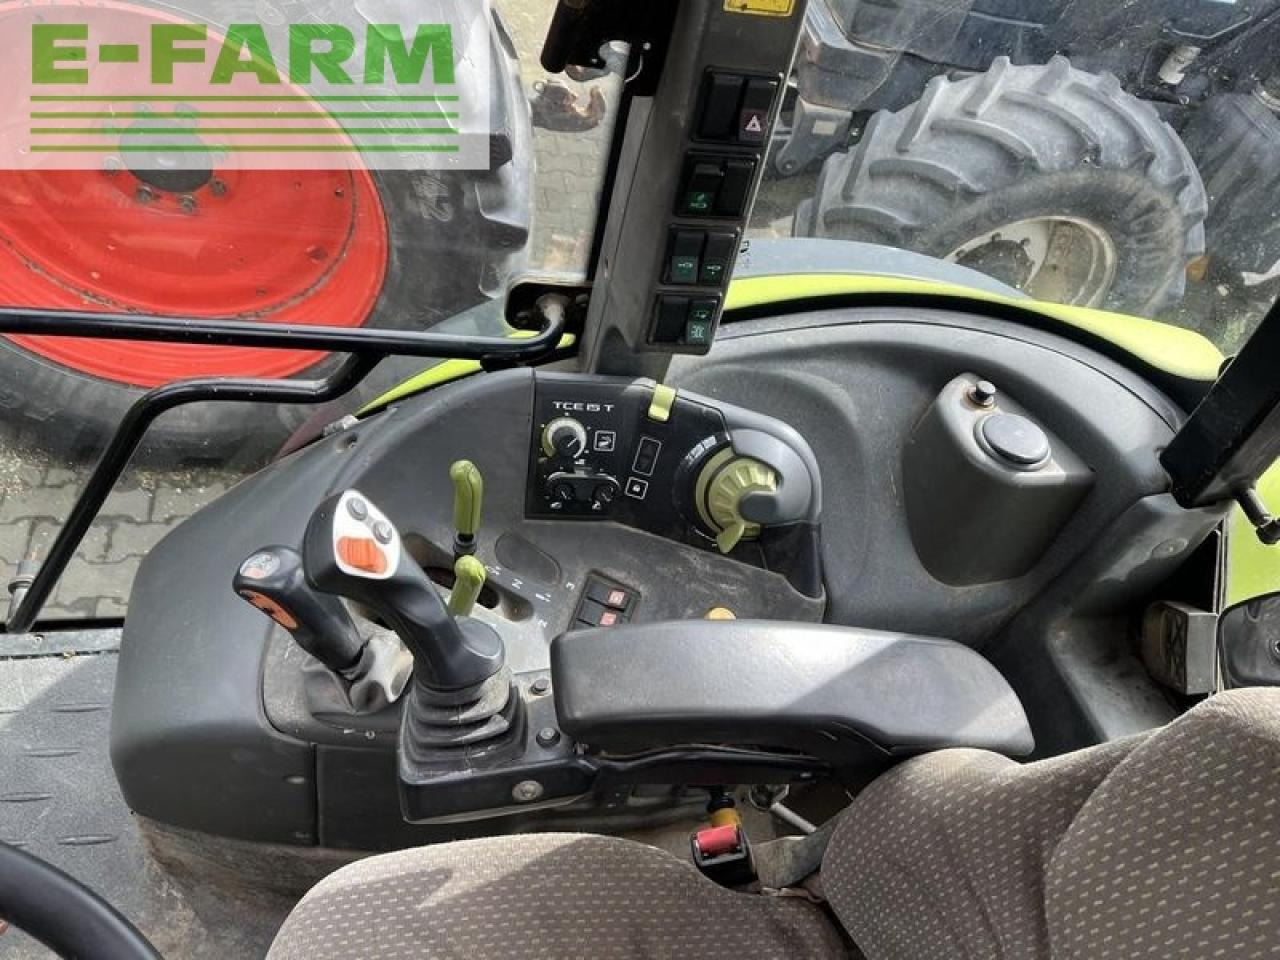 Farm tractor CLAAS arion 420 cis + claas fl100: picture 12